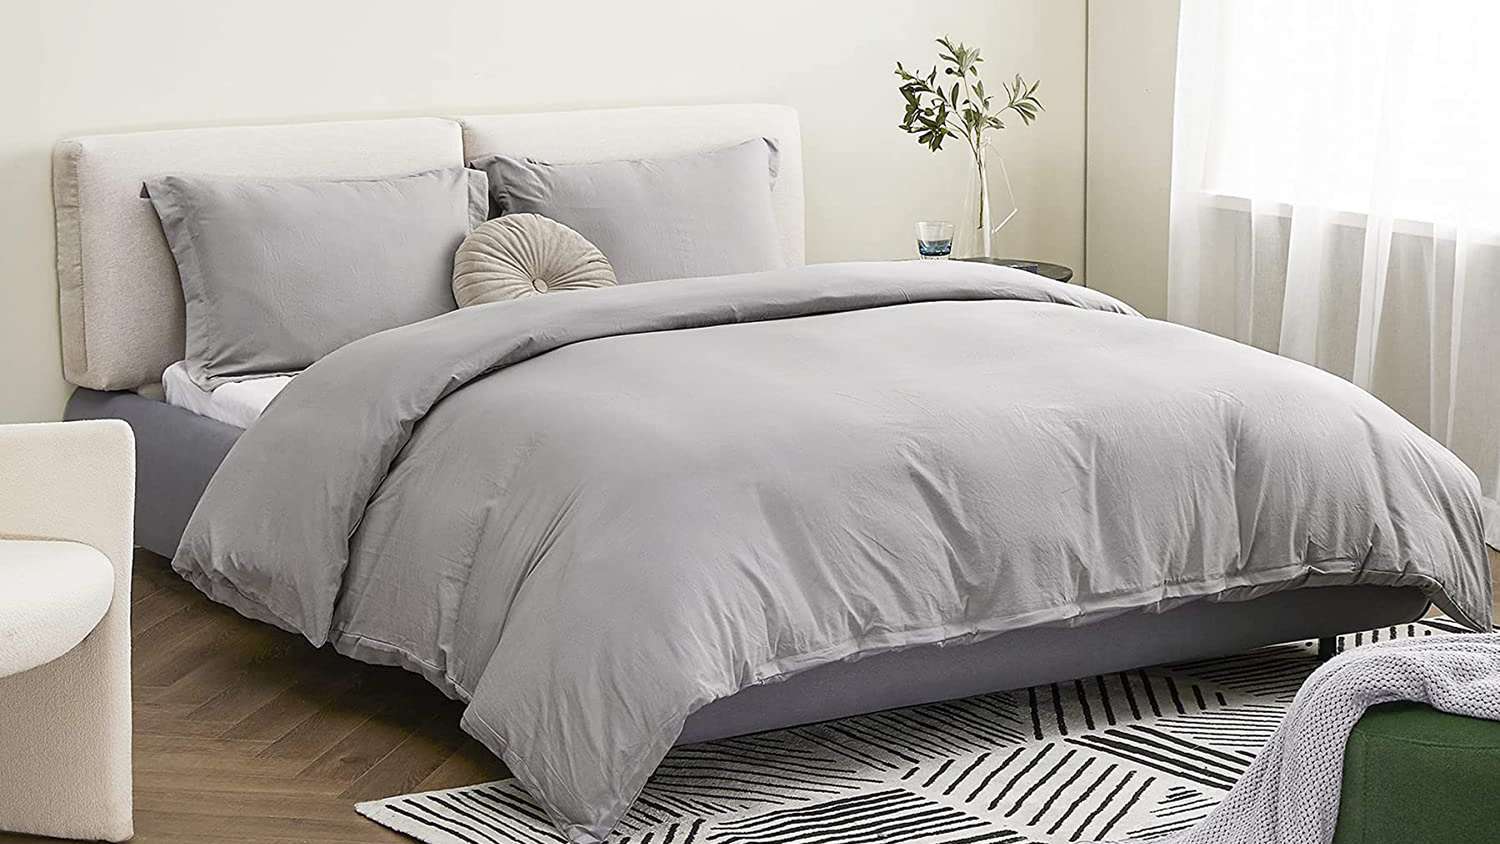 The 16 Best Duvet Covers You Can, How To Keep A Comforter In Place Duvet Covers